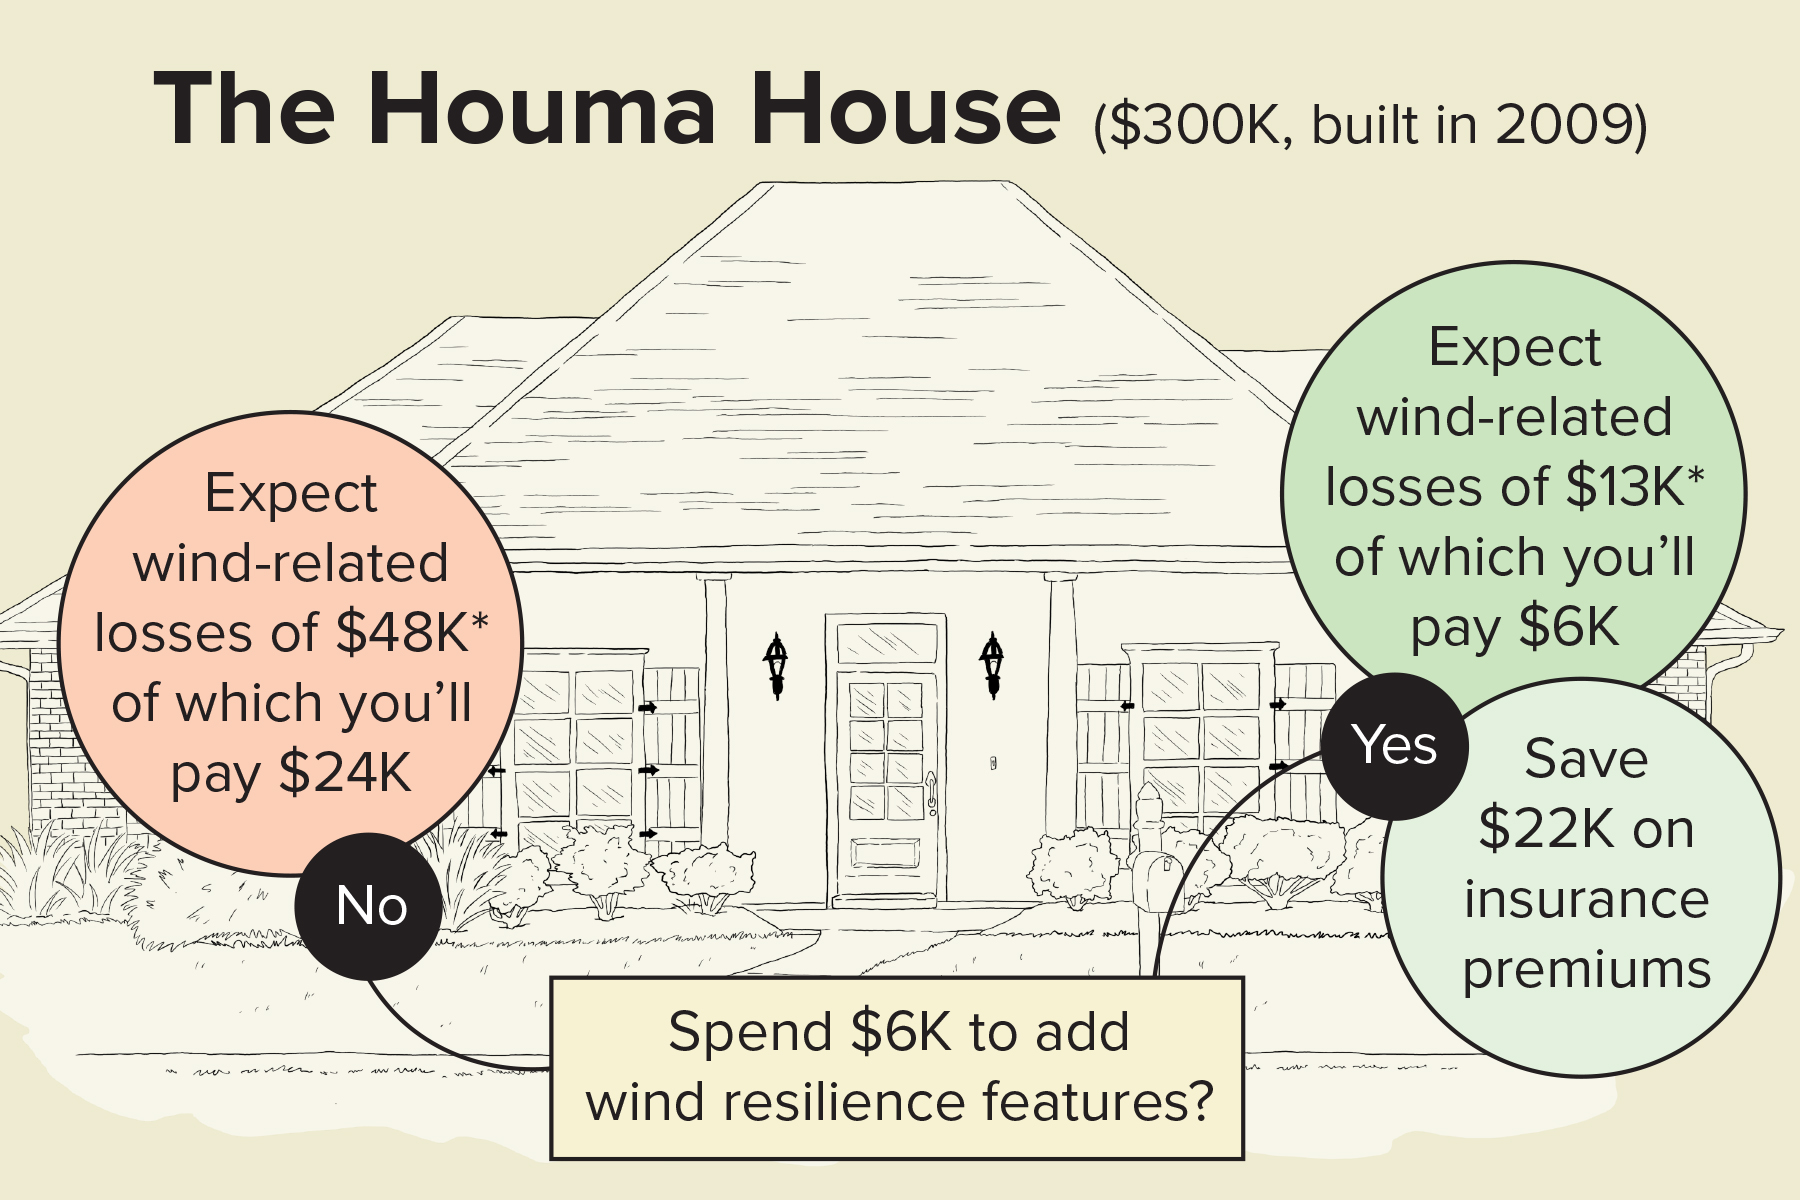 Houma House: spend $6k on wind resilience; save $22K on insurance premiums; may reduce wind damage by $35K and out-of-pocket costs by $18K